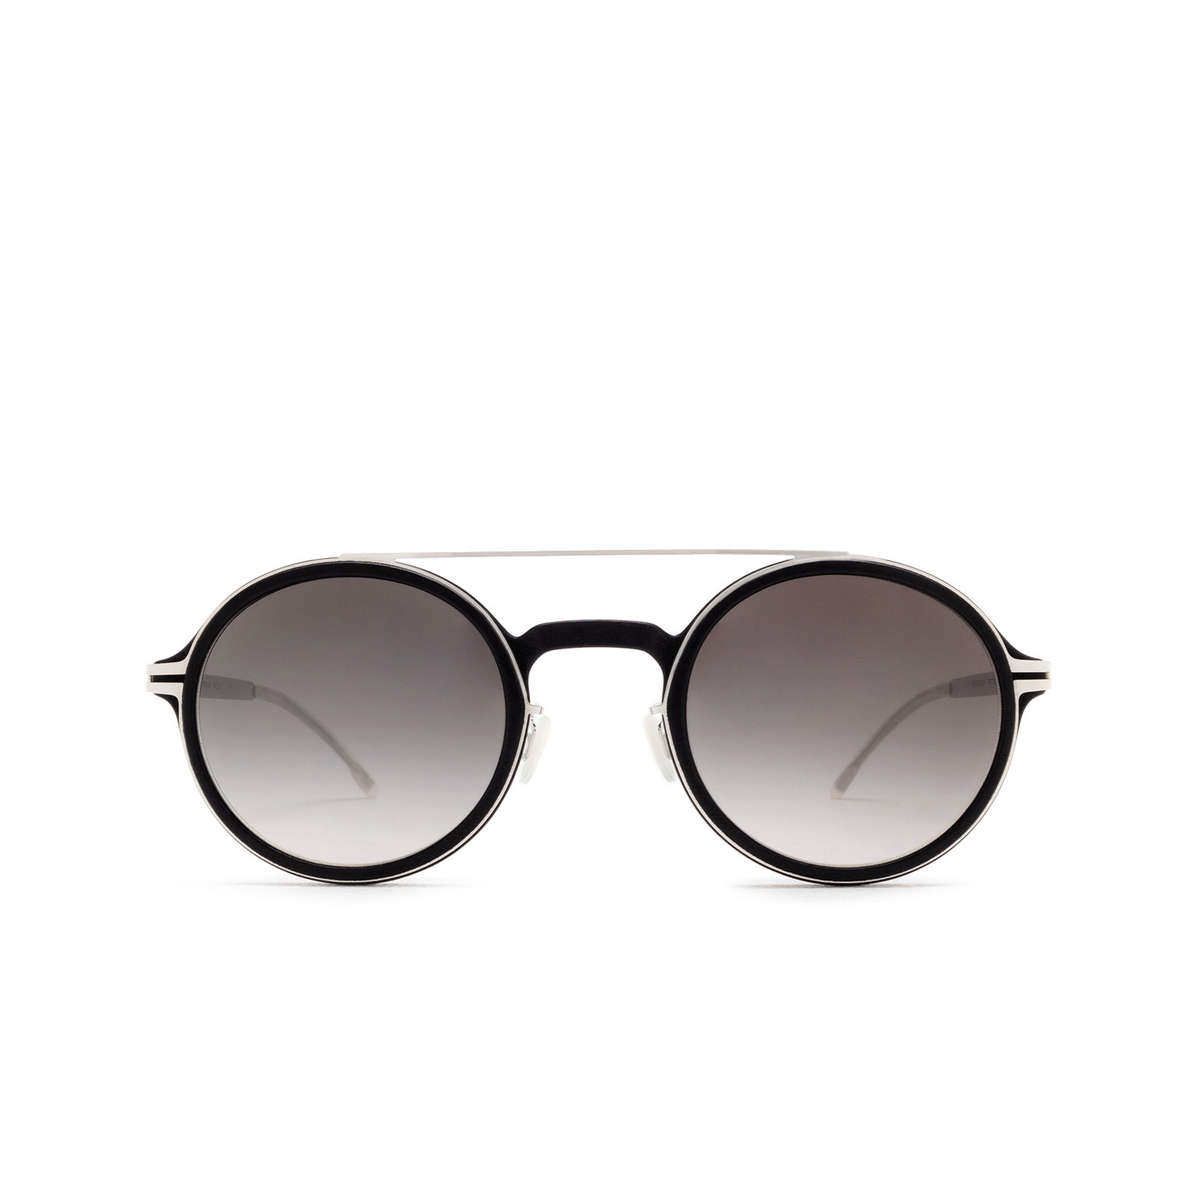 Mykita® Round Sunglasses: Hemlock color 351 Mh22-pitch Black/shine Silver - front view